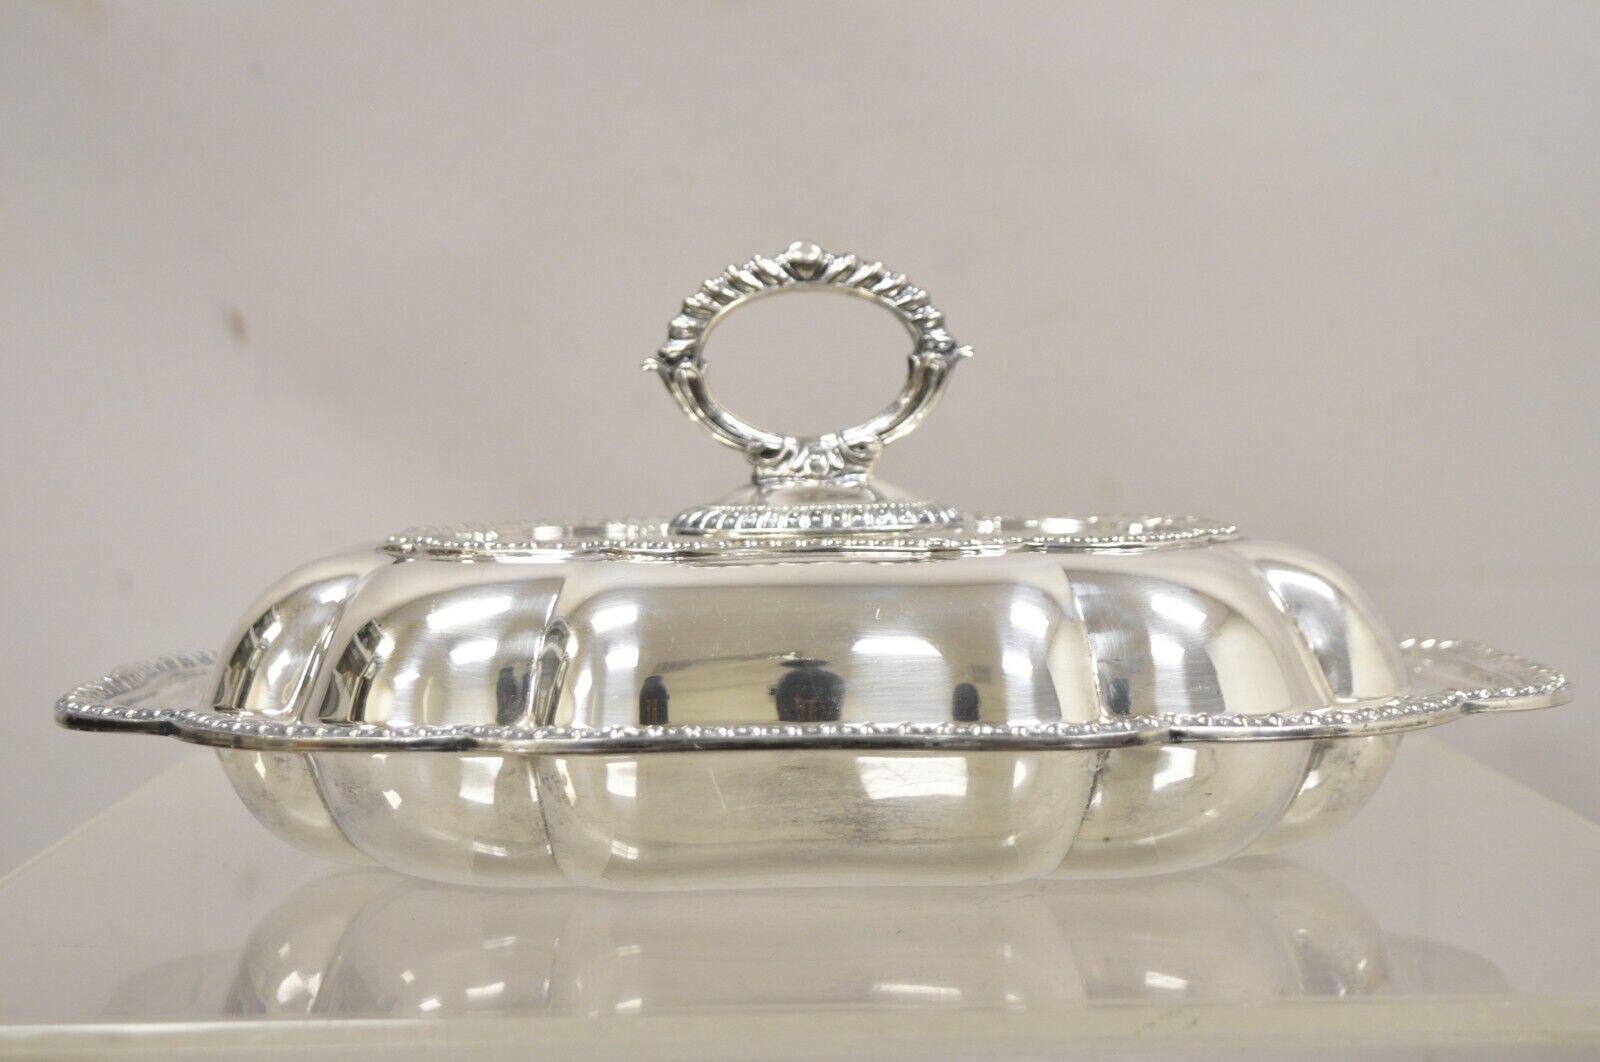 Vintage English Victorian Style Silver Plated Scalloped Covered Serving Platter Dish. Circa Mid 20th Century. Measurements: 6